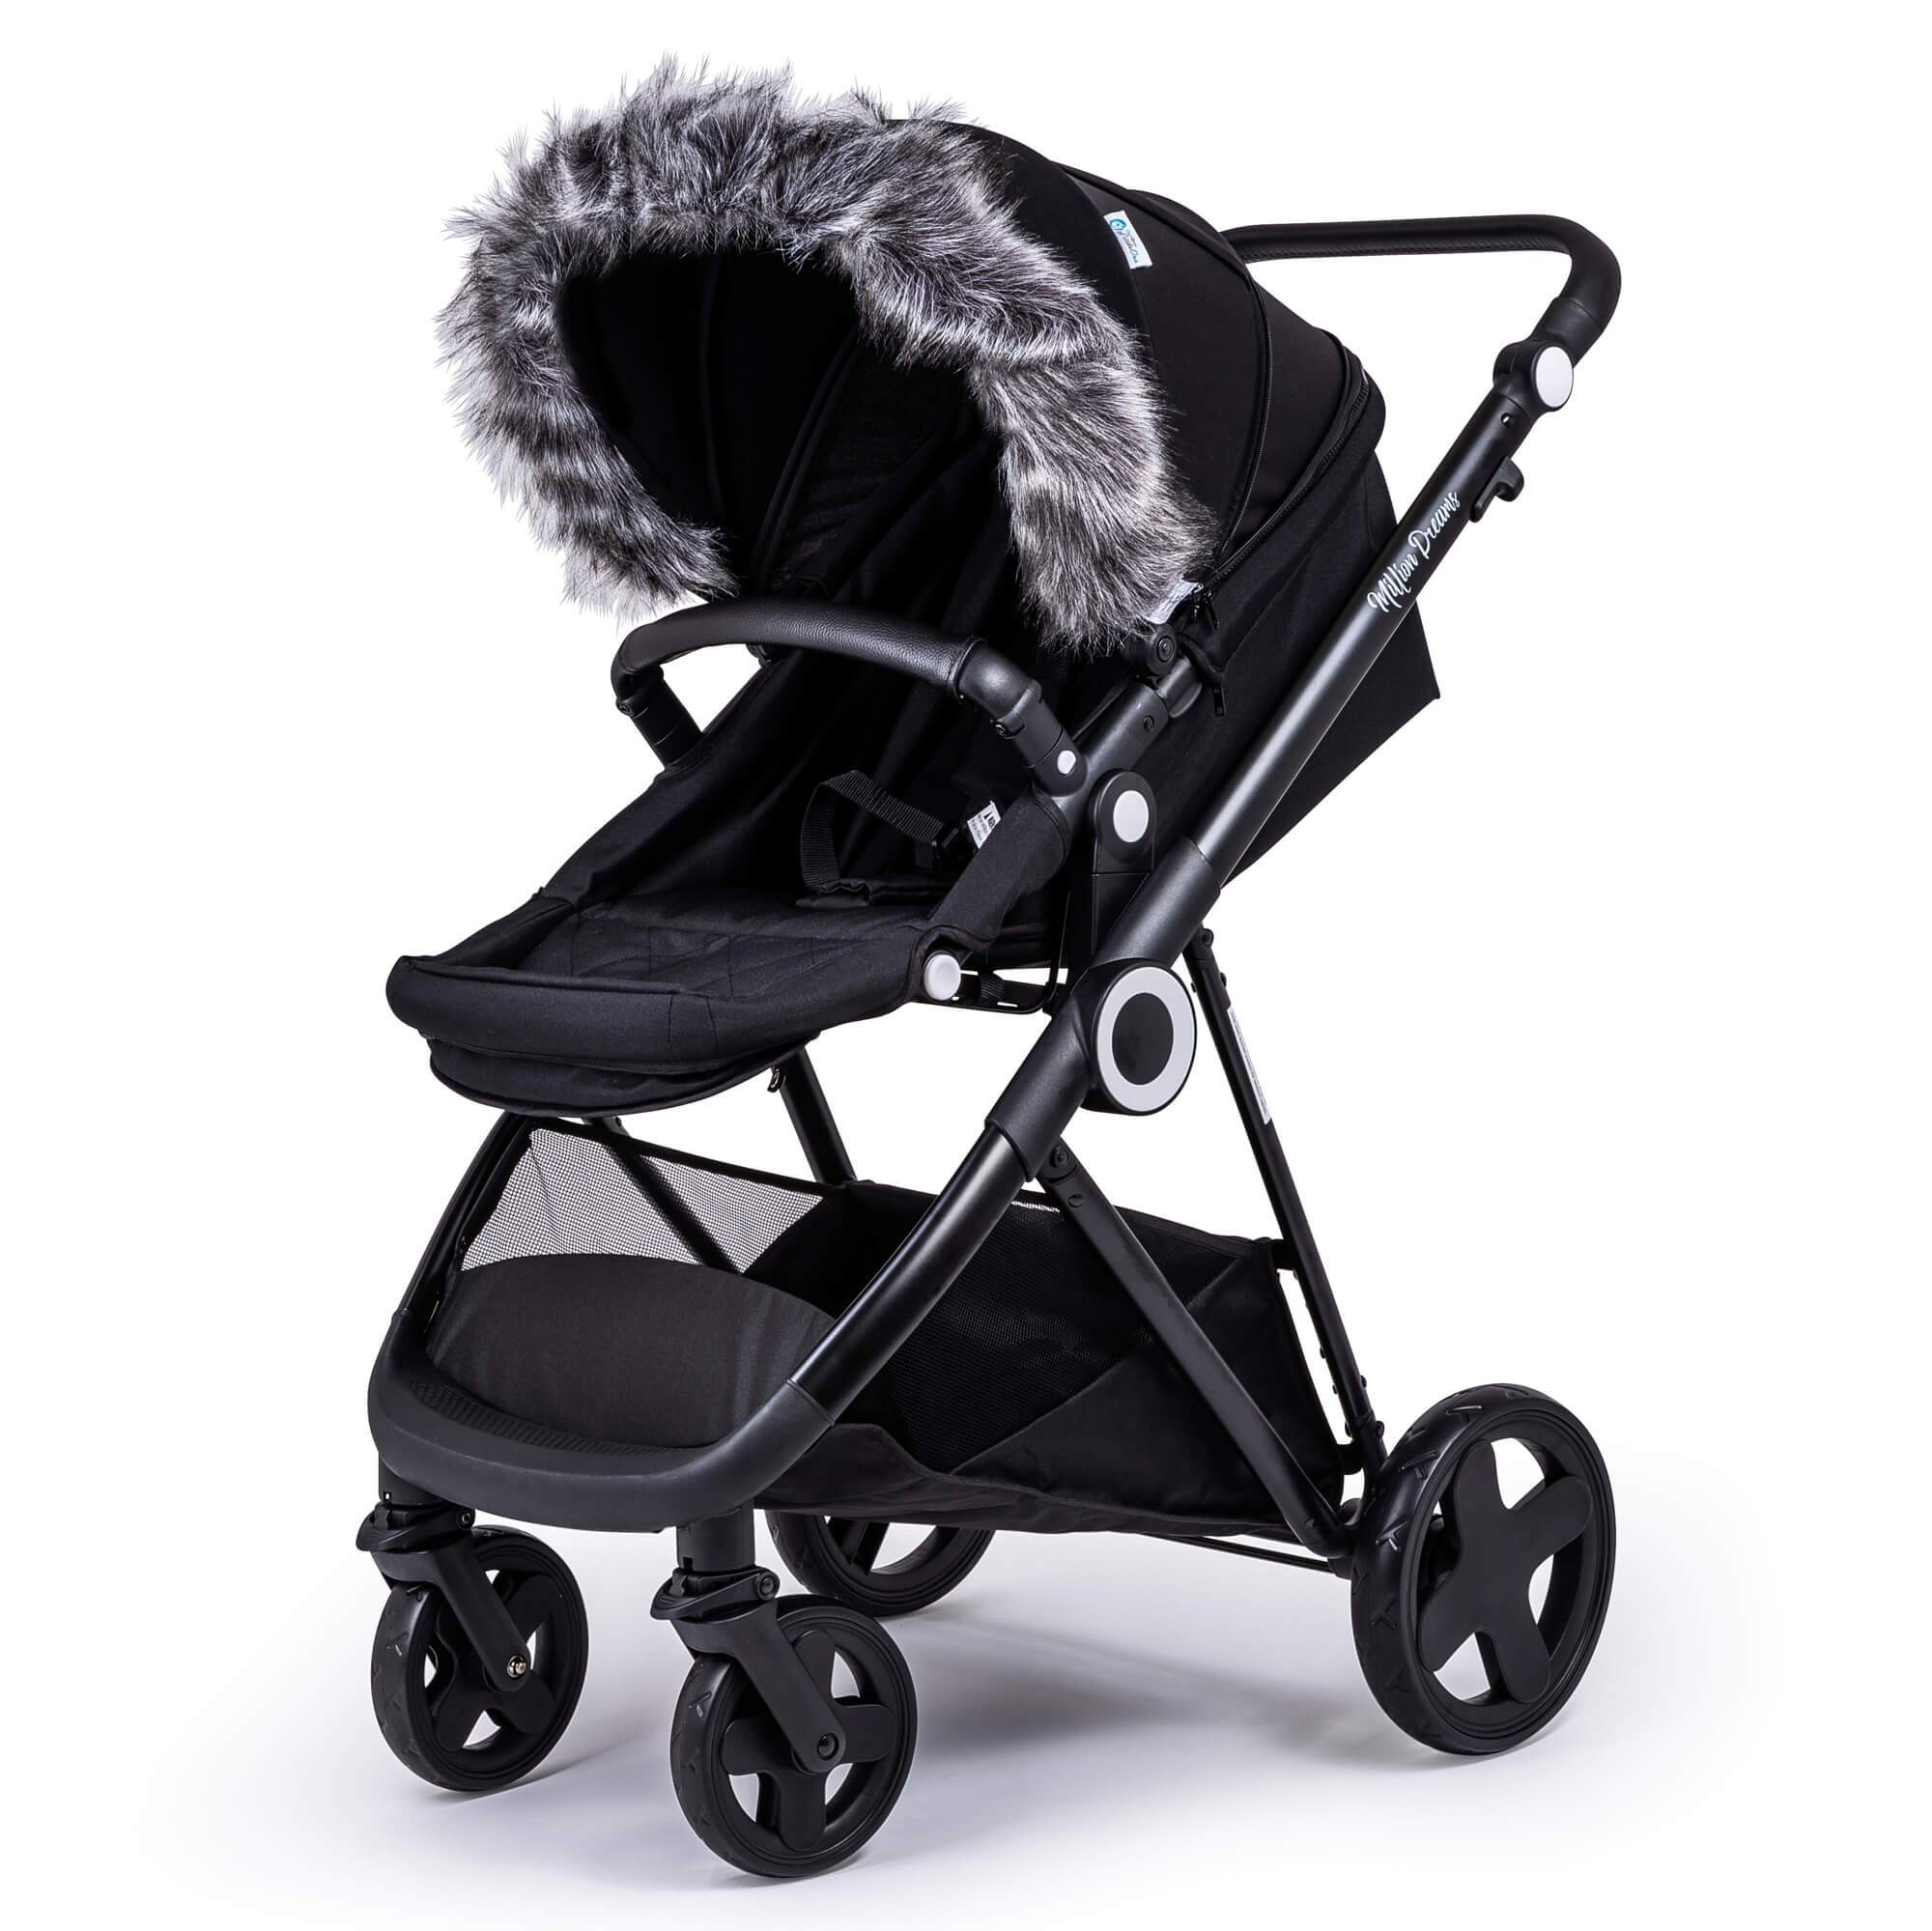 Pram Fur Hood Trim Attachment for Pushchair Compatible with Graco - Dark Grey / Fits All Models | For Your Little One